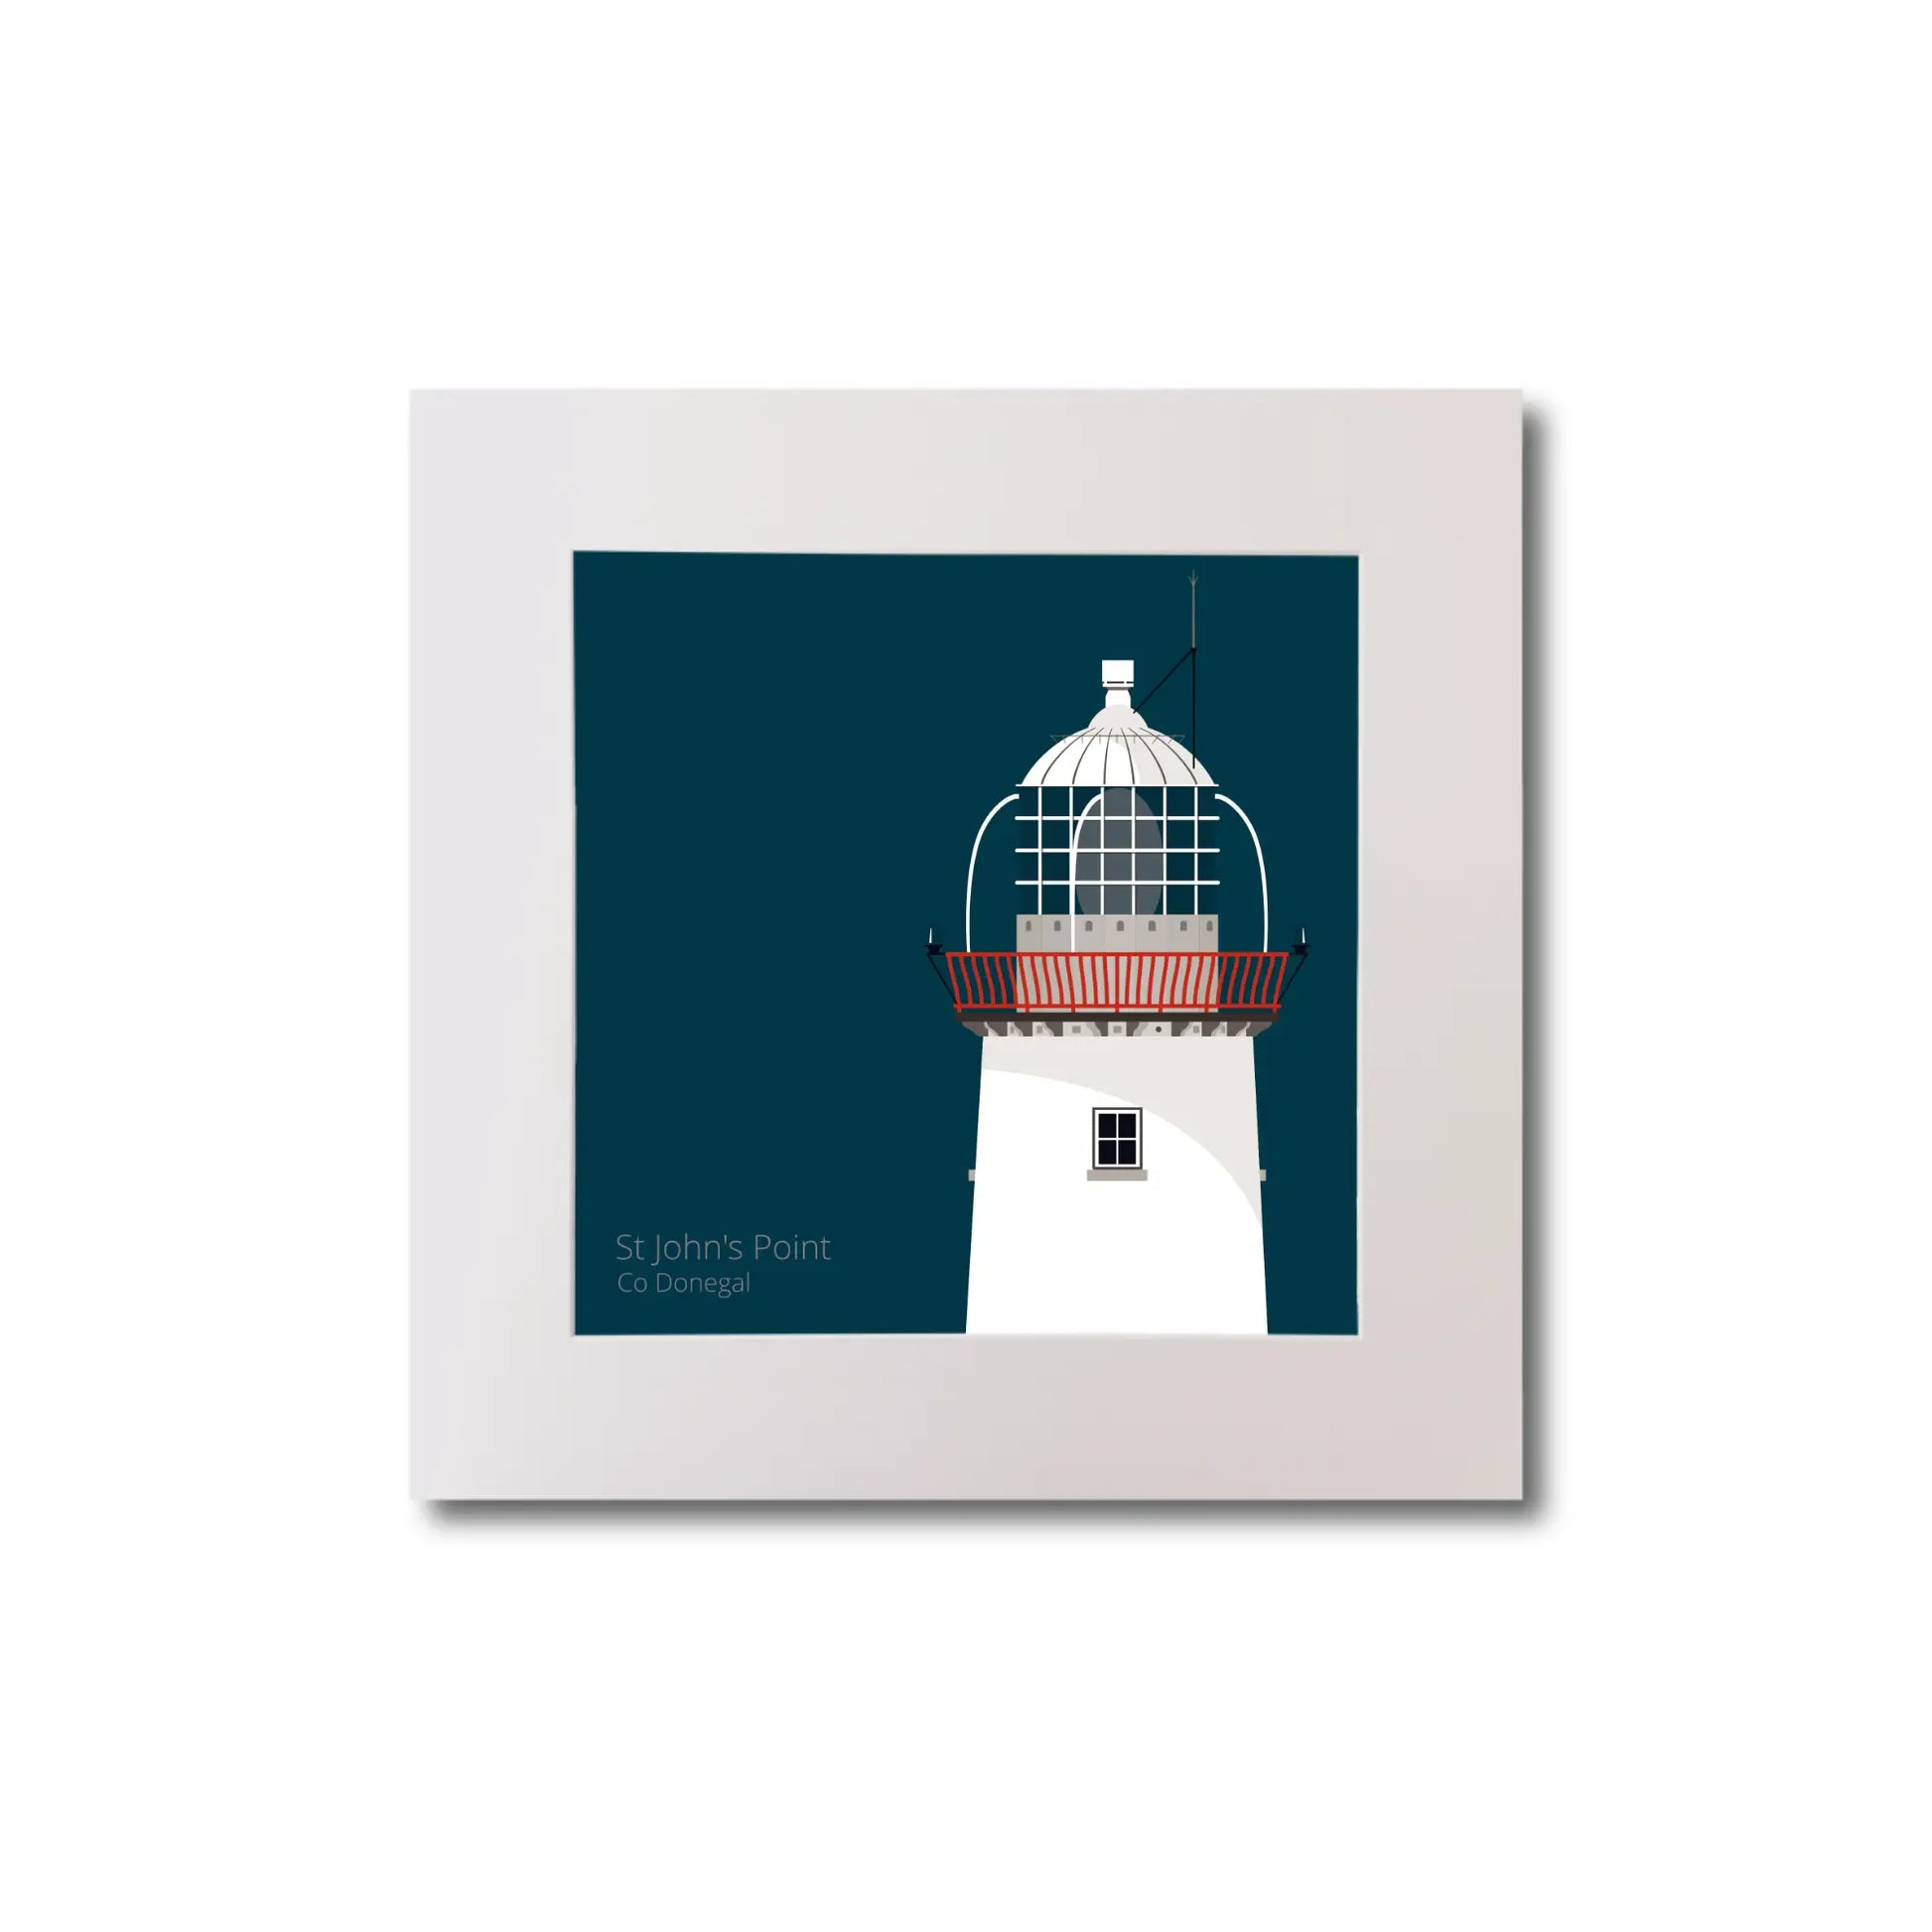 Illustration of St.John's (Donegal) lighthouse on a midnight blue background, mounted and measuring 20x20cm.